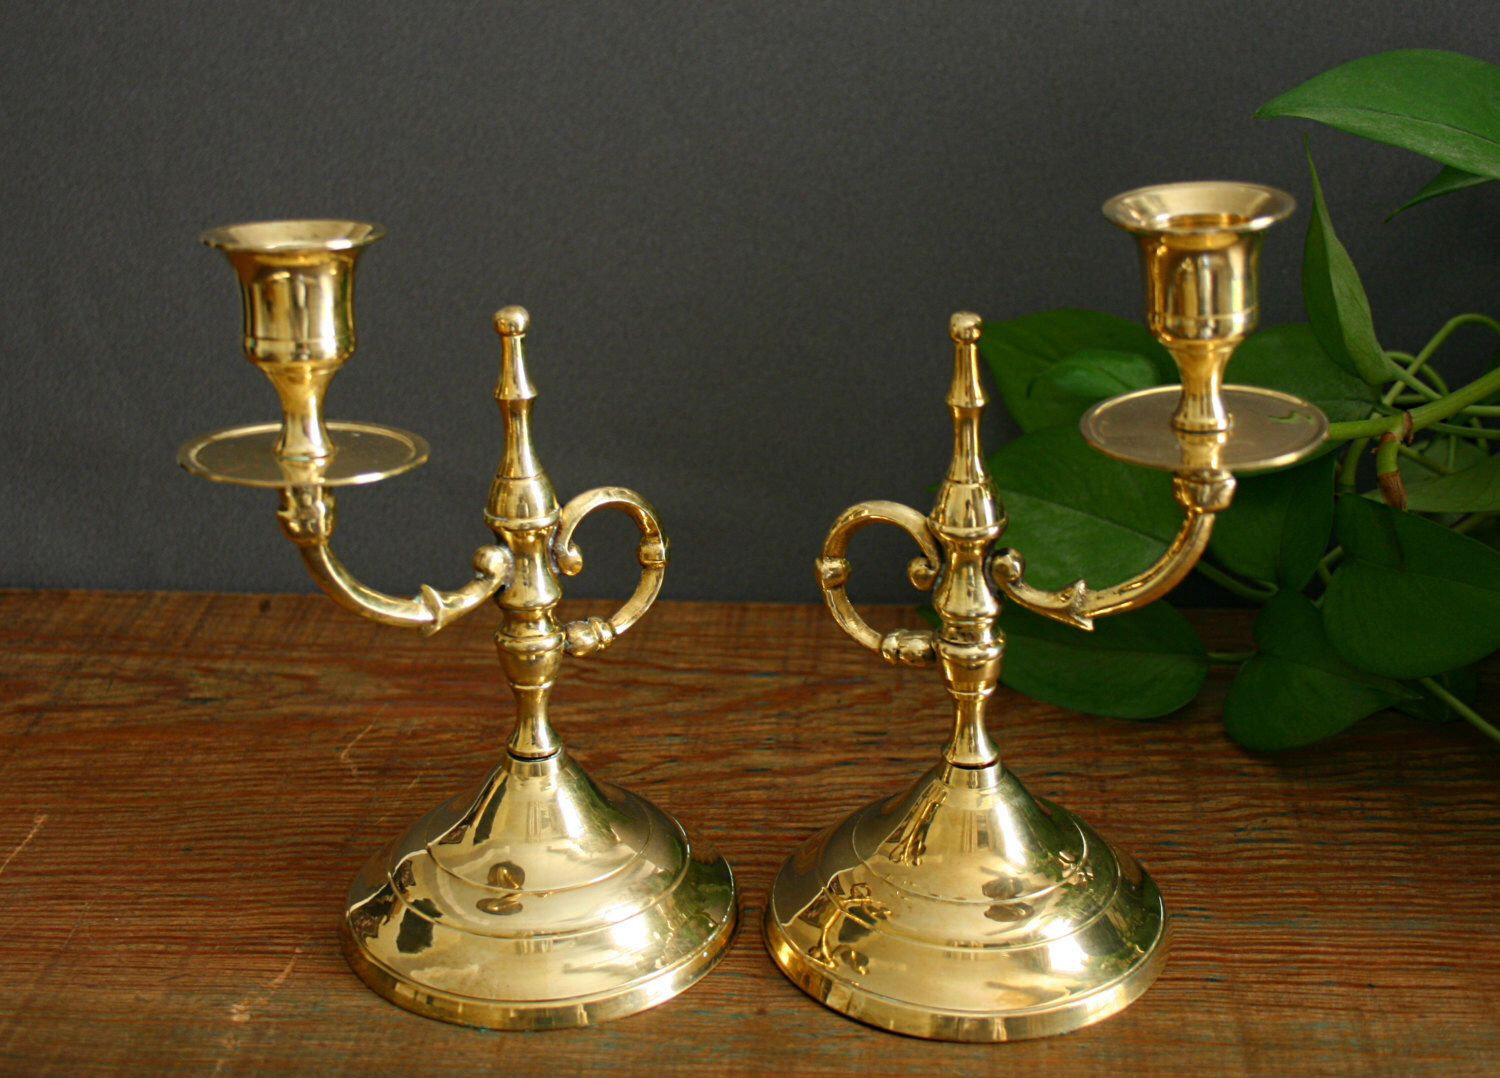 10 Recommended Vintage Brass Vase 2024 free download vintage brass vase of vintage brass candlesticks gold candle stick holders with handles for vintage brass candlesticks brass candle holders with handles by sunnyleaffinds on etsy